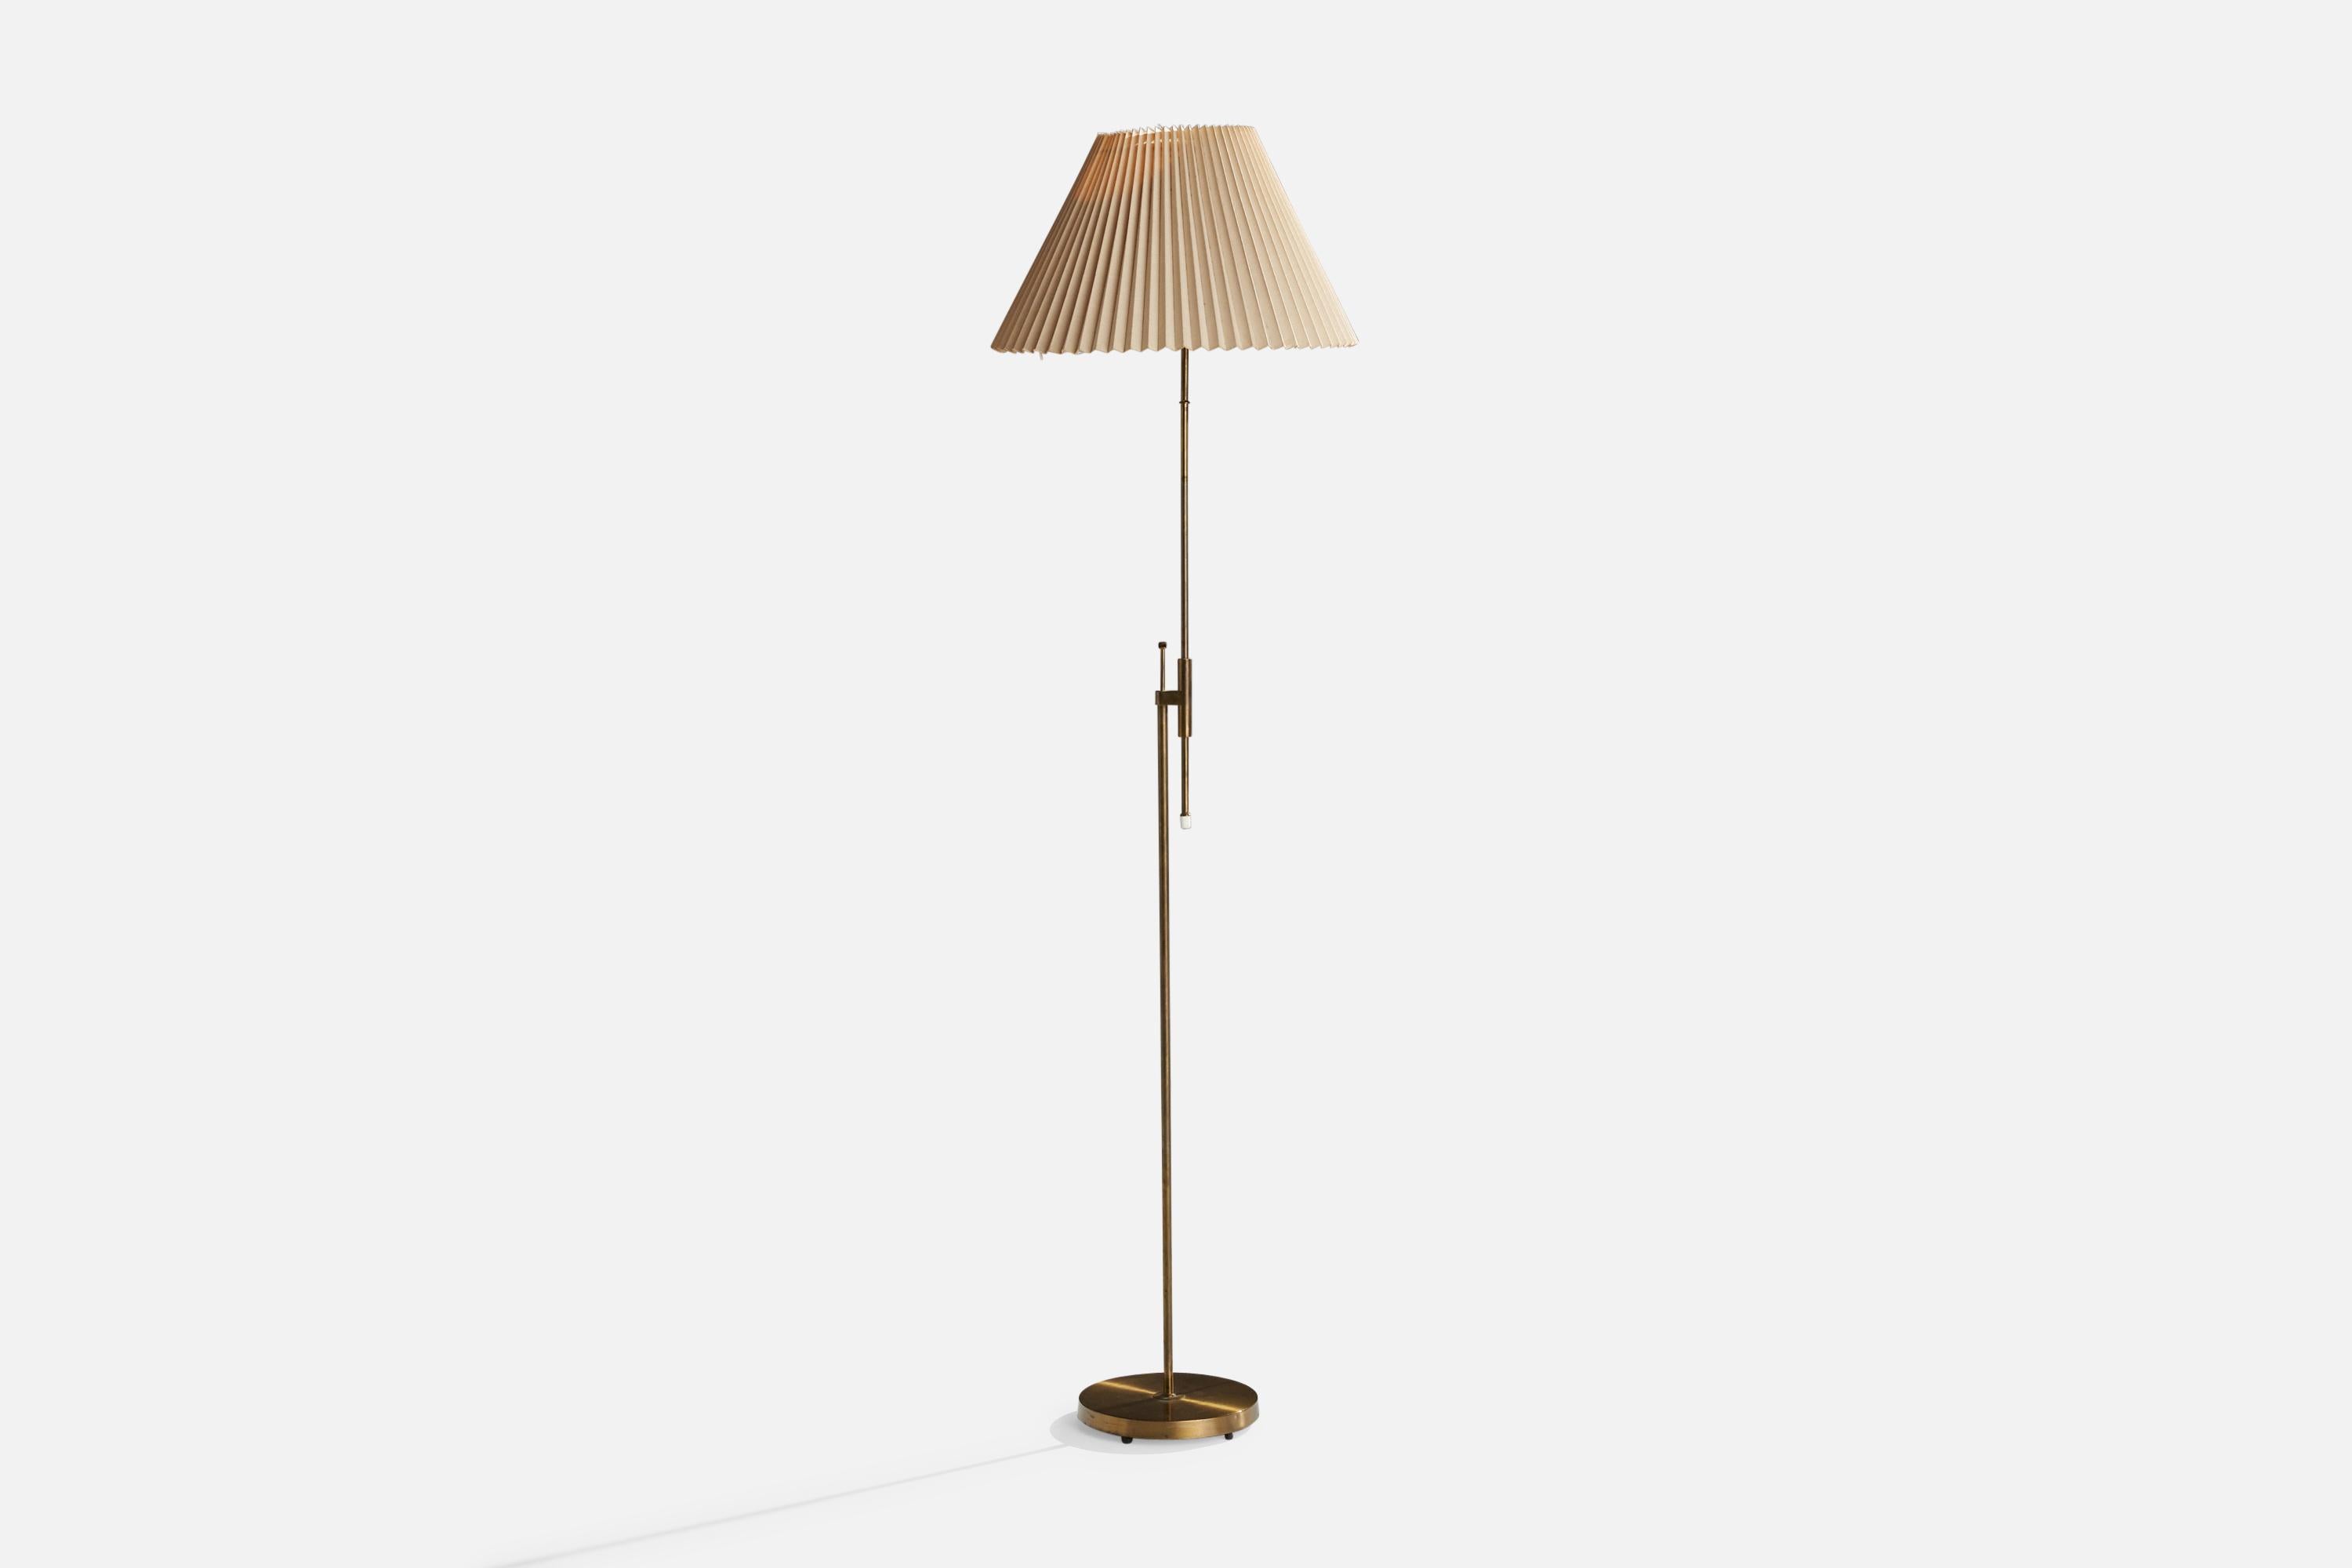 An adjustable brass and beige paper floor lamp designed and produced by Falkenbergs Belysning, Sweden, 1960s.

Overall Dimensions (inches): 69” H x 18.2” Diameter
Height is variable, stated dimension is at its tallest configuration.
Stated